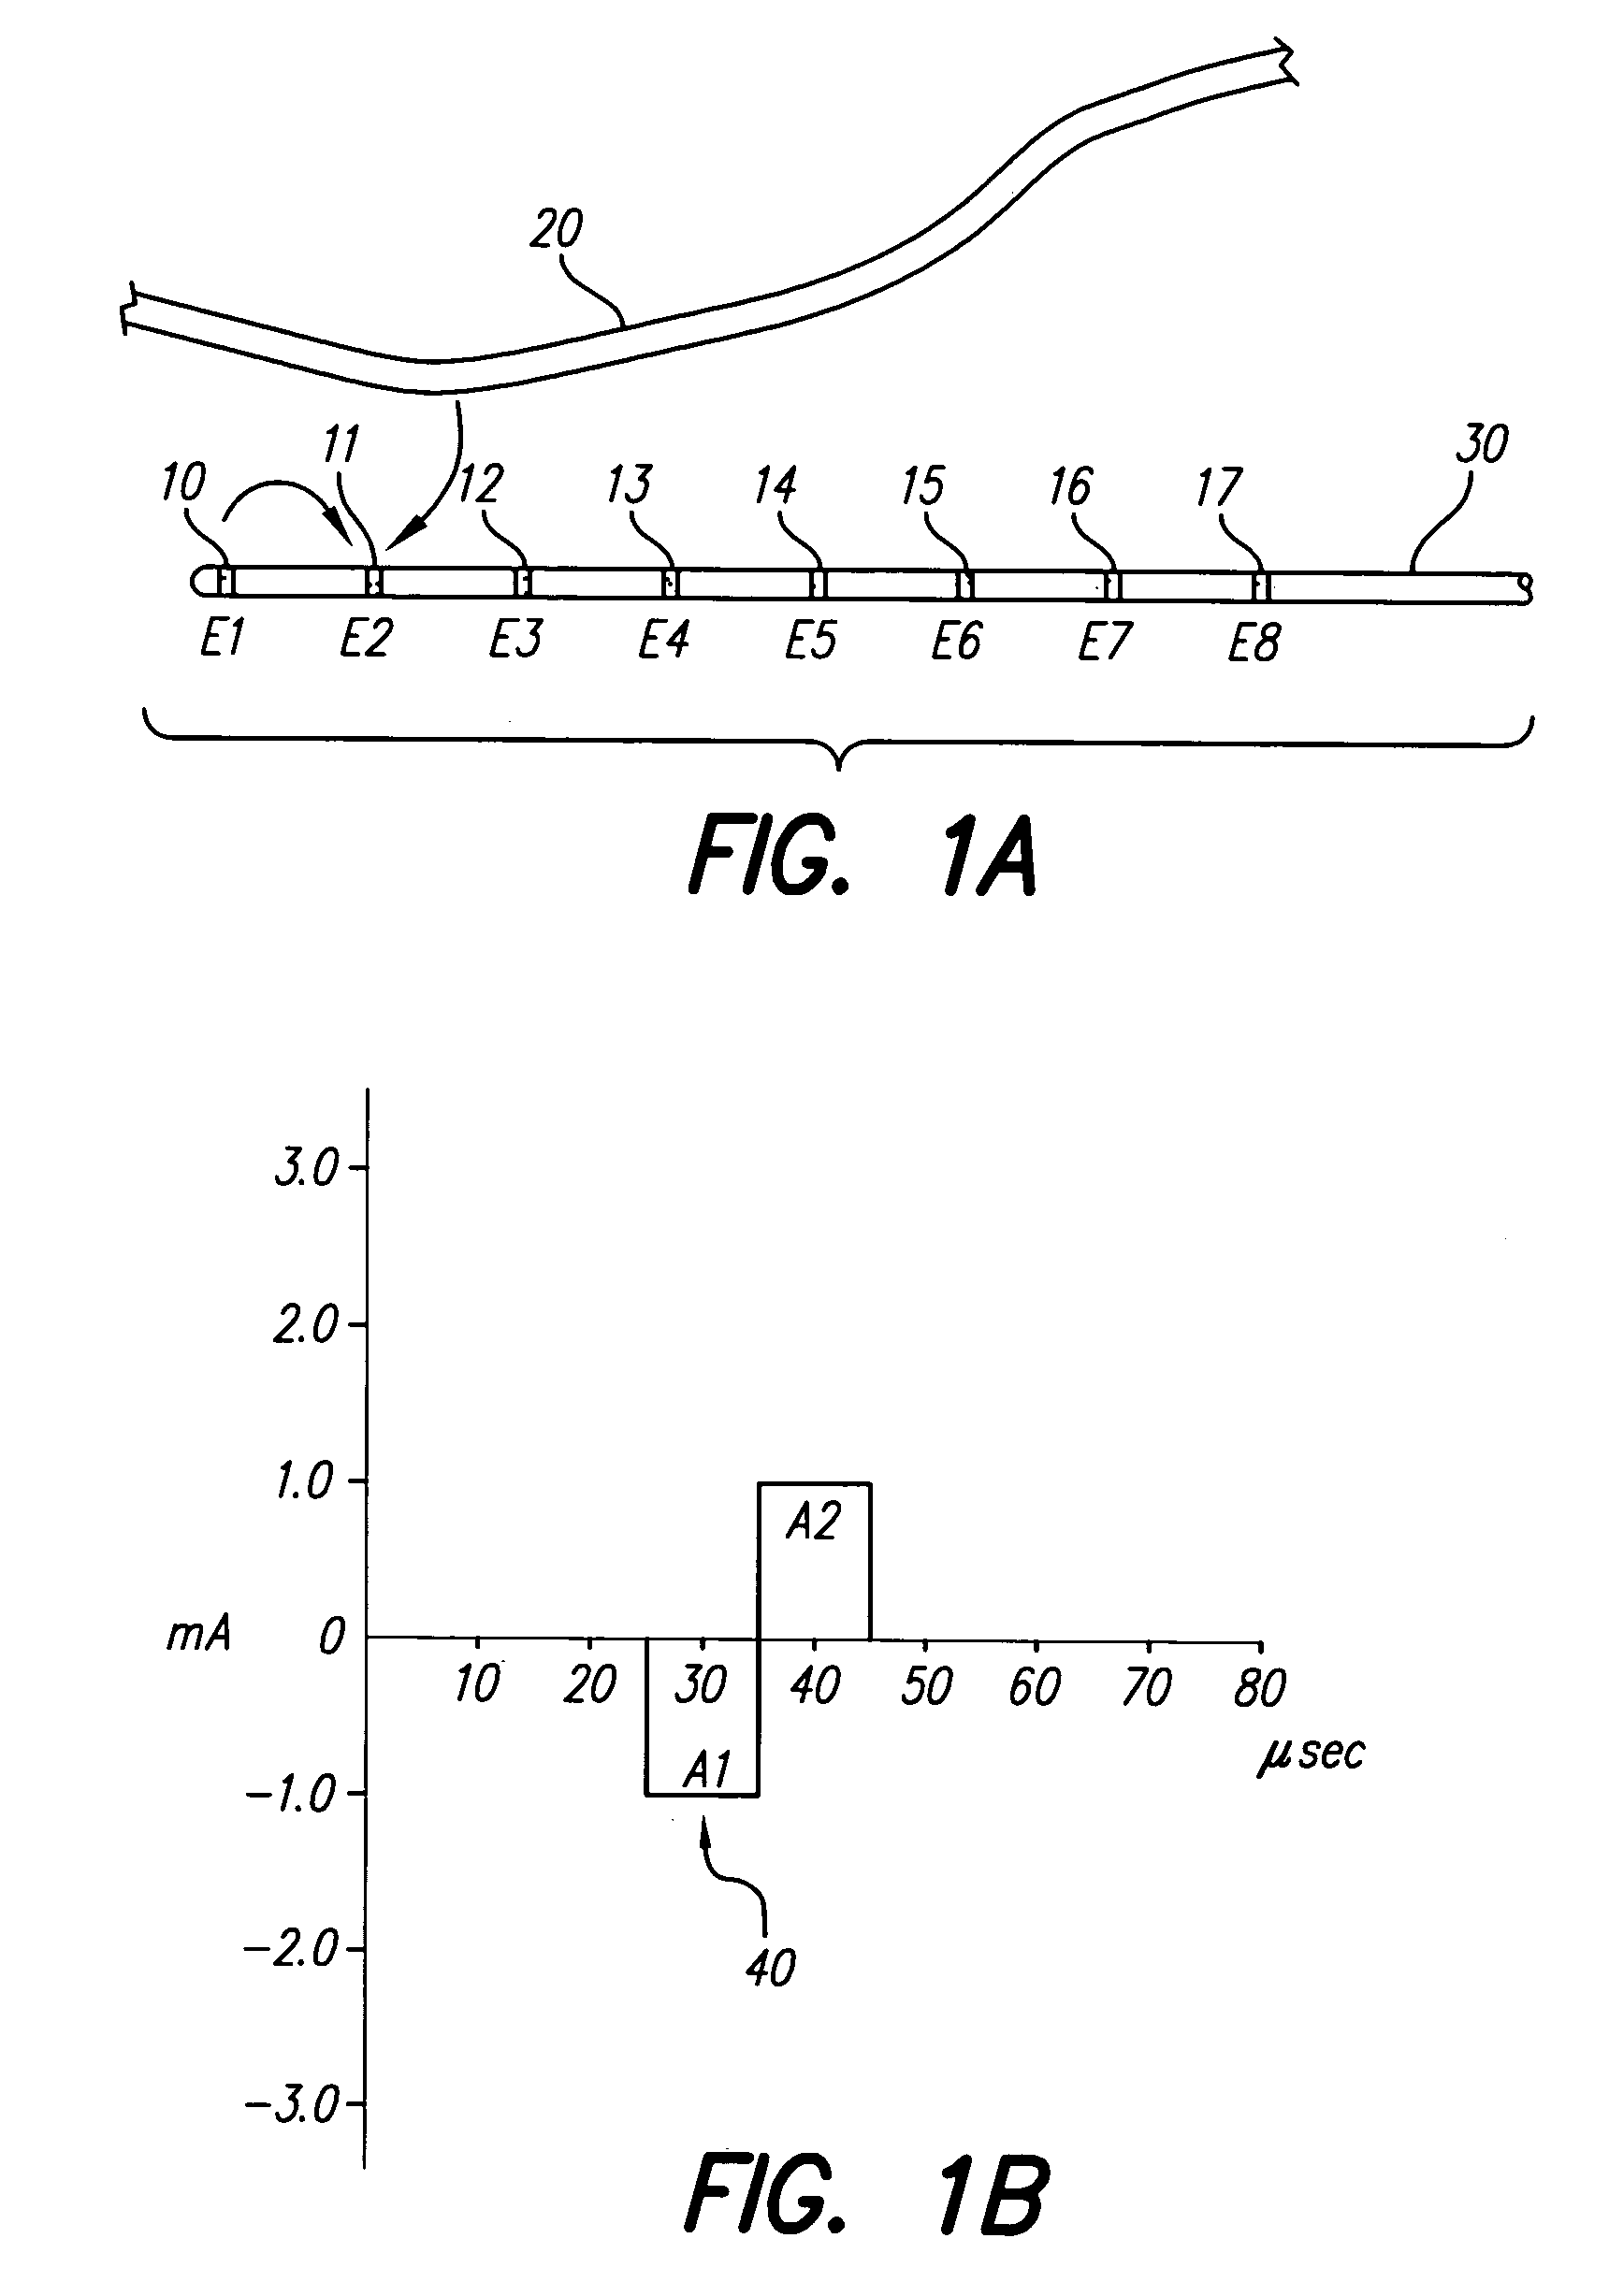 Method of rapid neural response measurement without amplitude attenuation